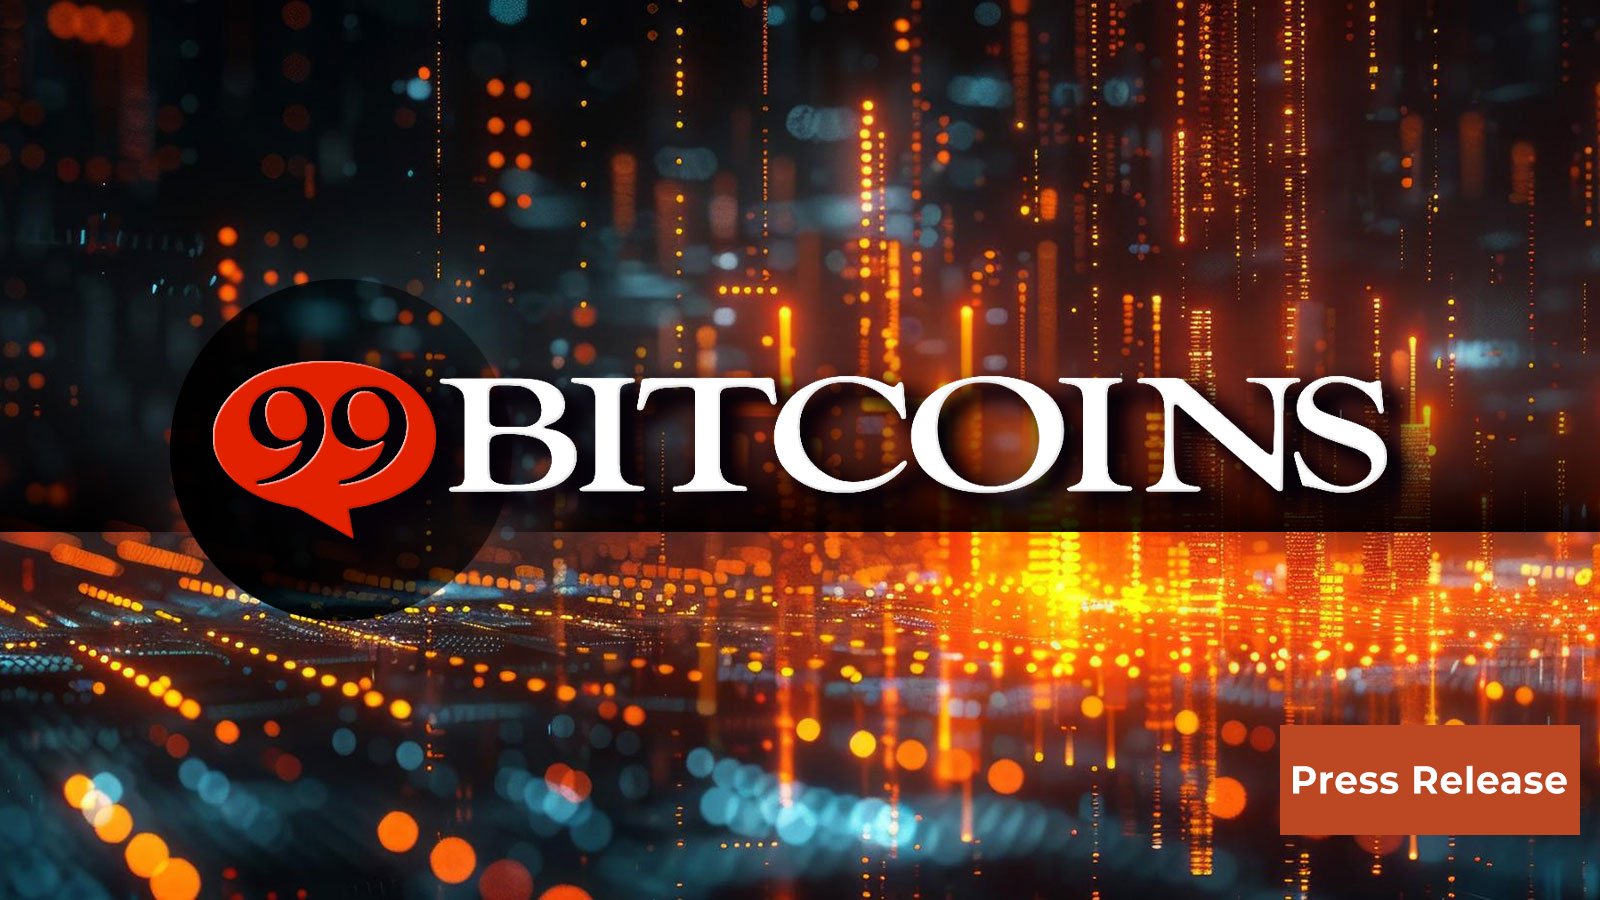 99Bitcoins Launches Presale – Learn-to-Earn Platform Raises $100,000 in a Flash